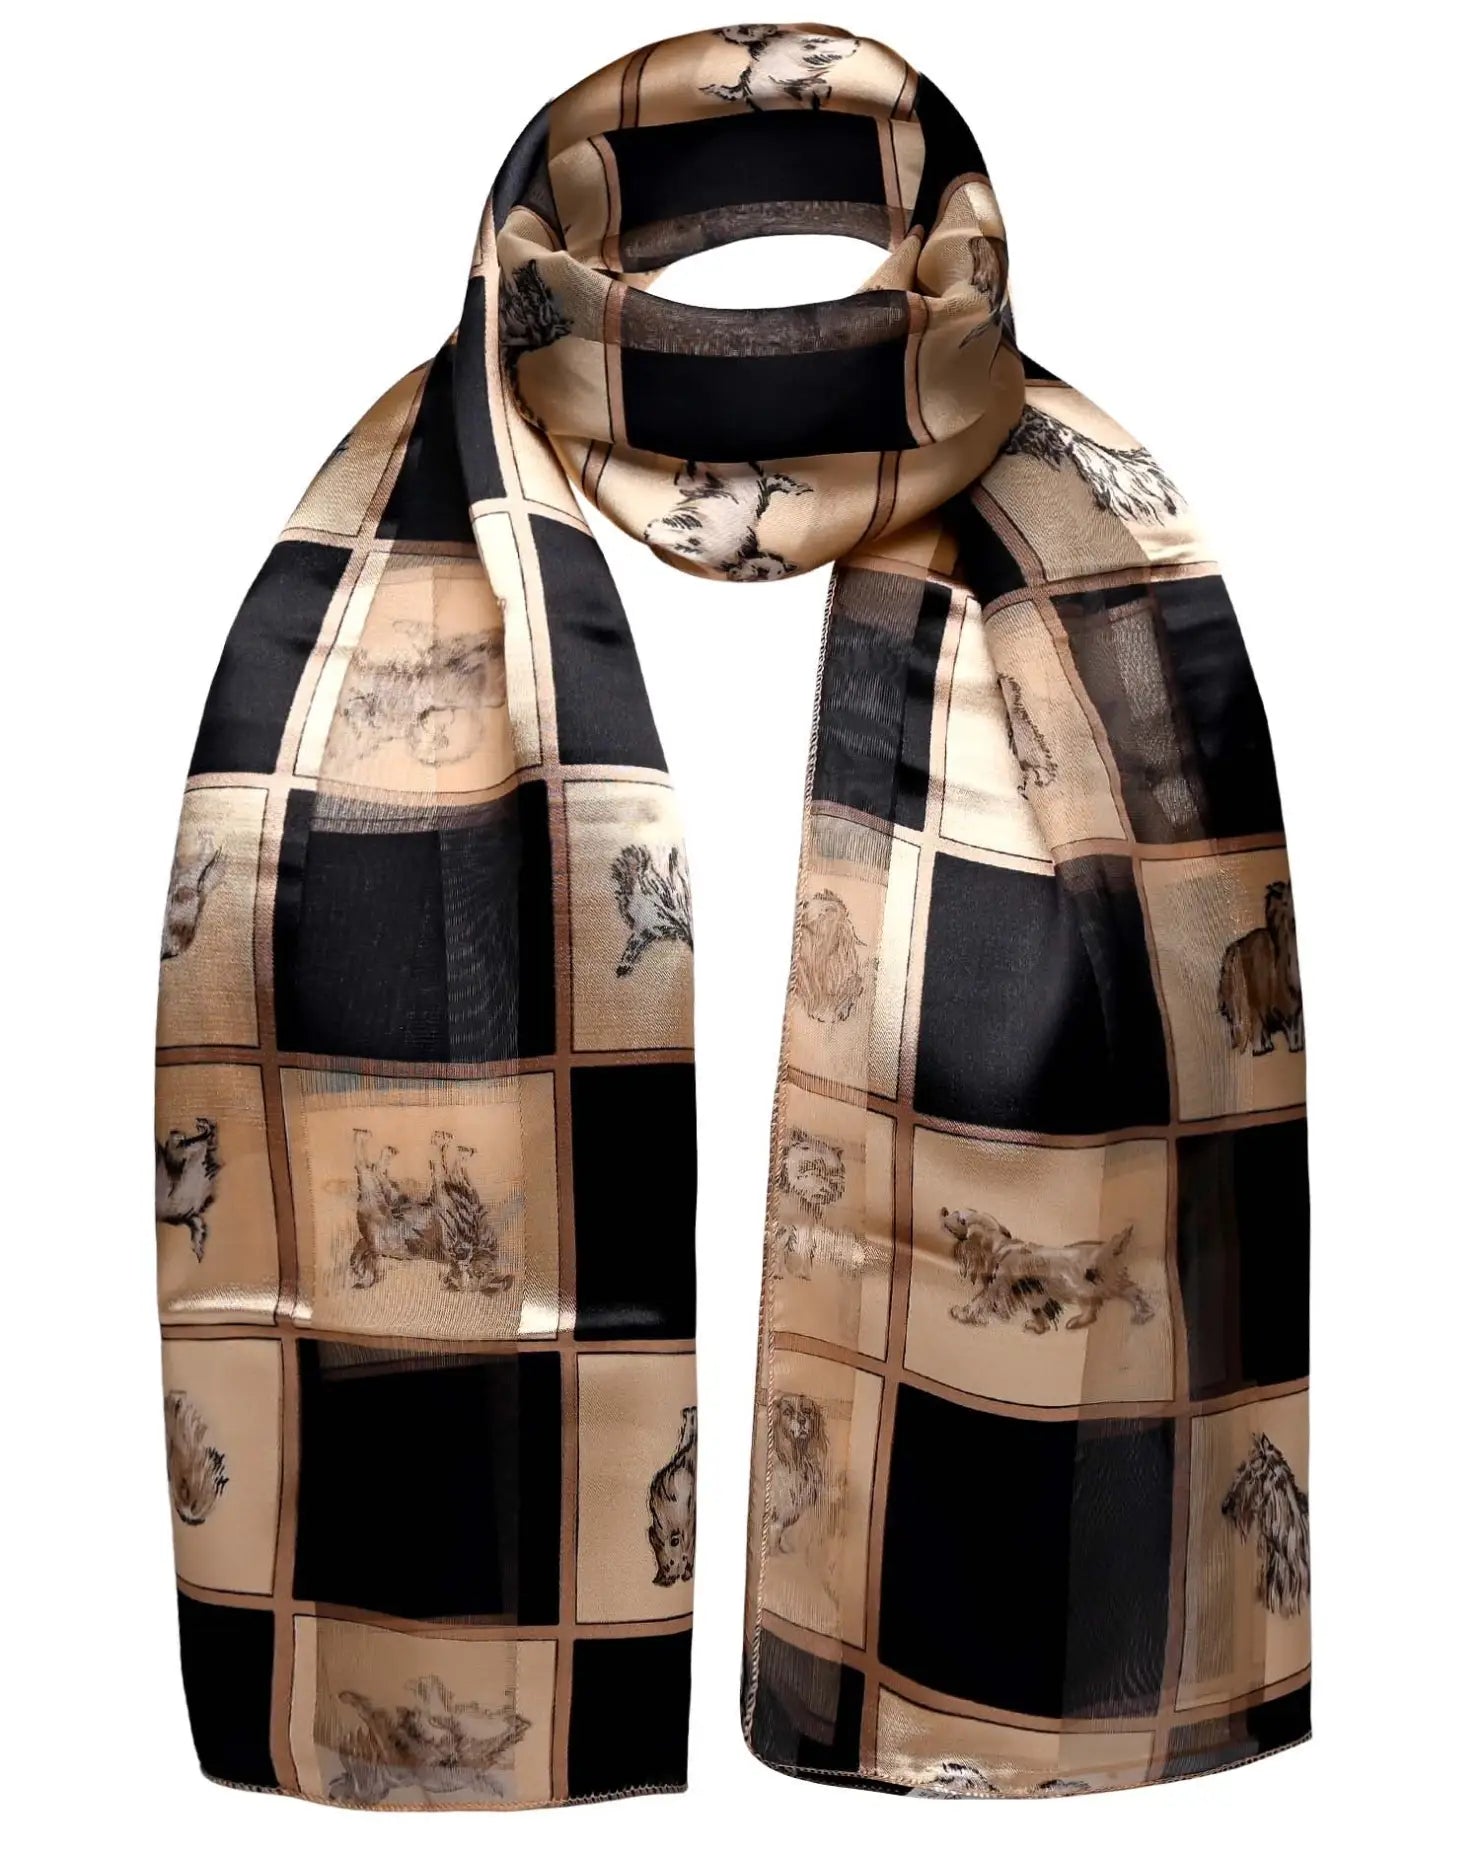 Luxurious Soft Satin Black and Beige Patterned Dog Print Scarf